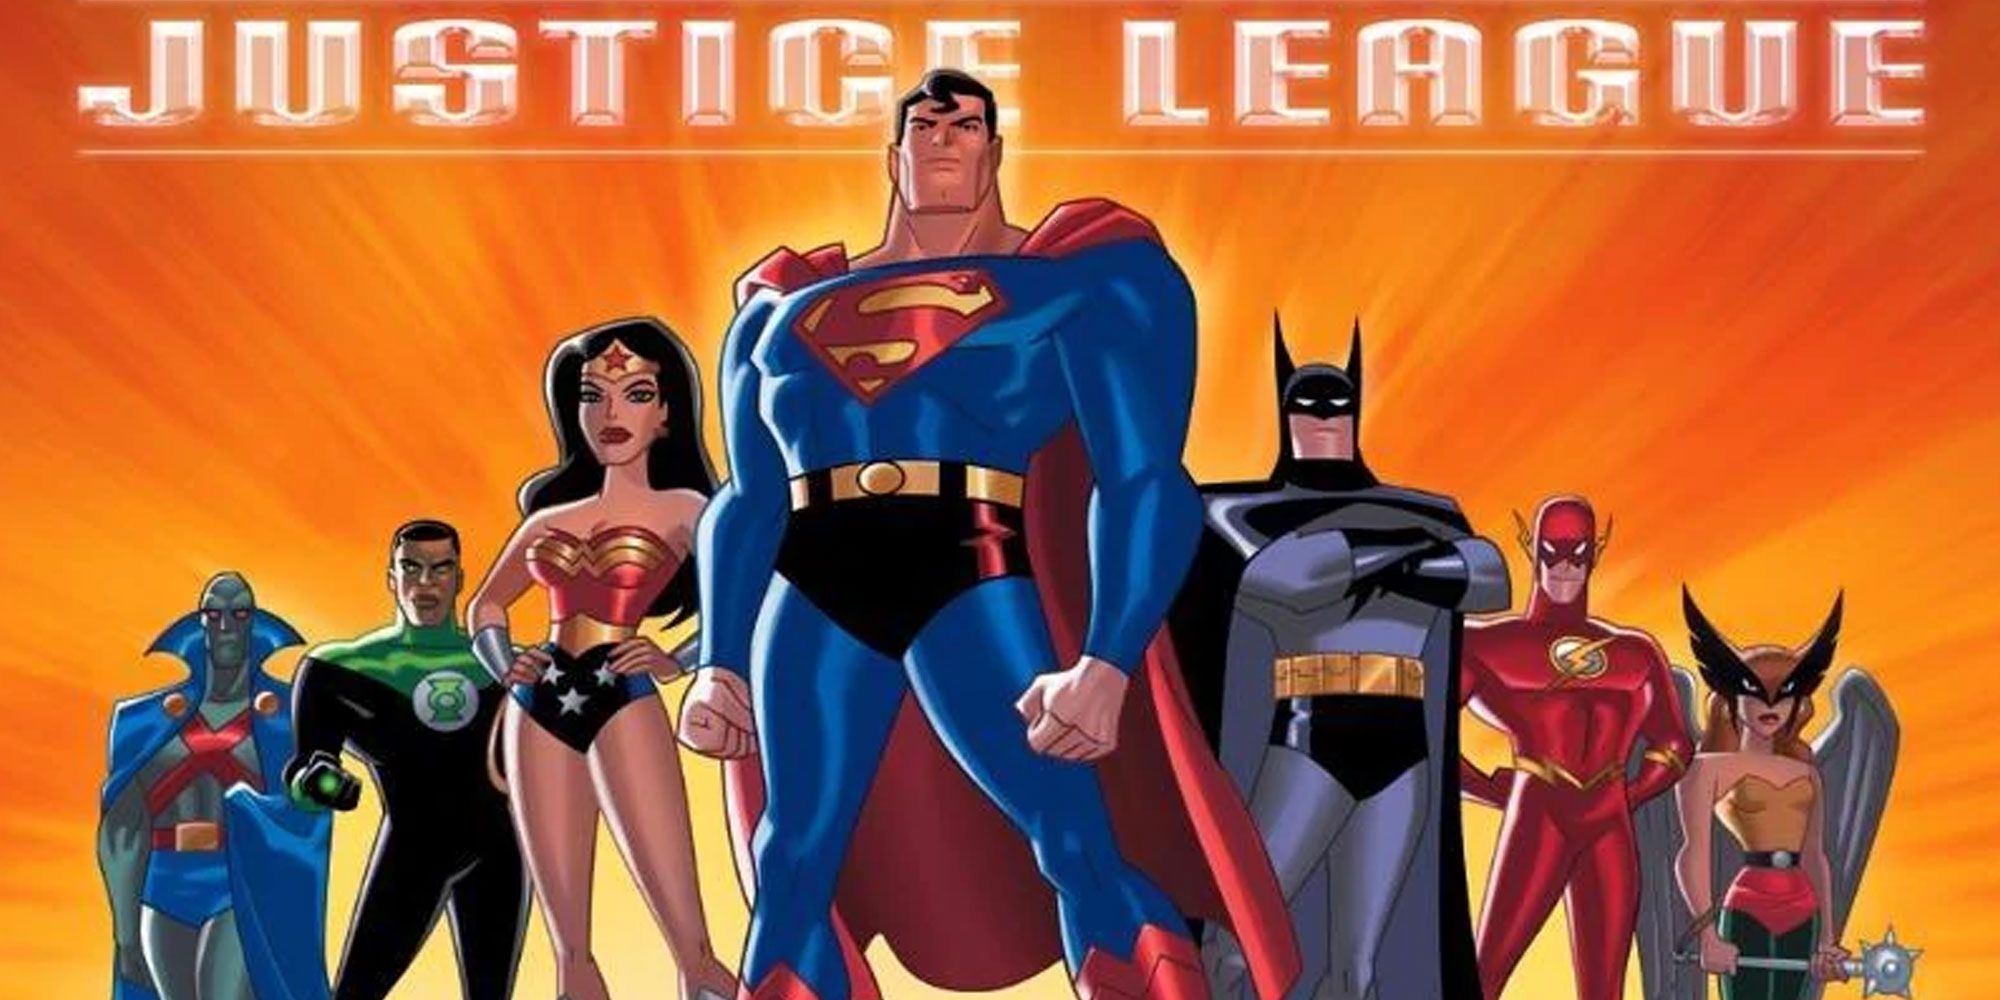 Promo art from Justice League in the DCAU